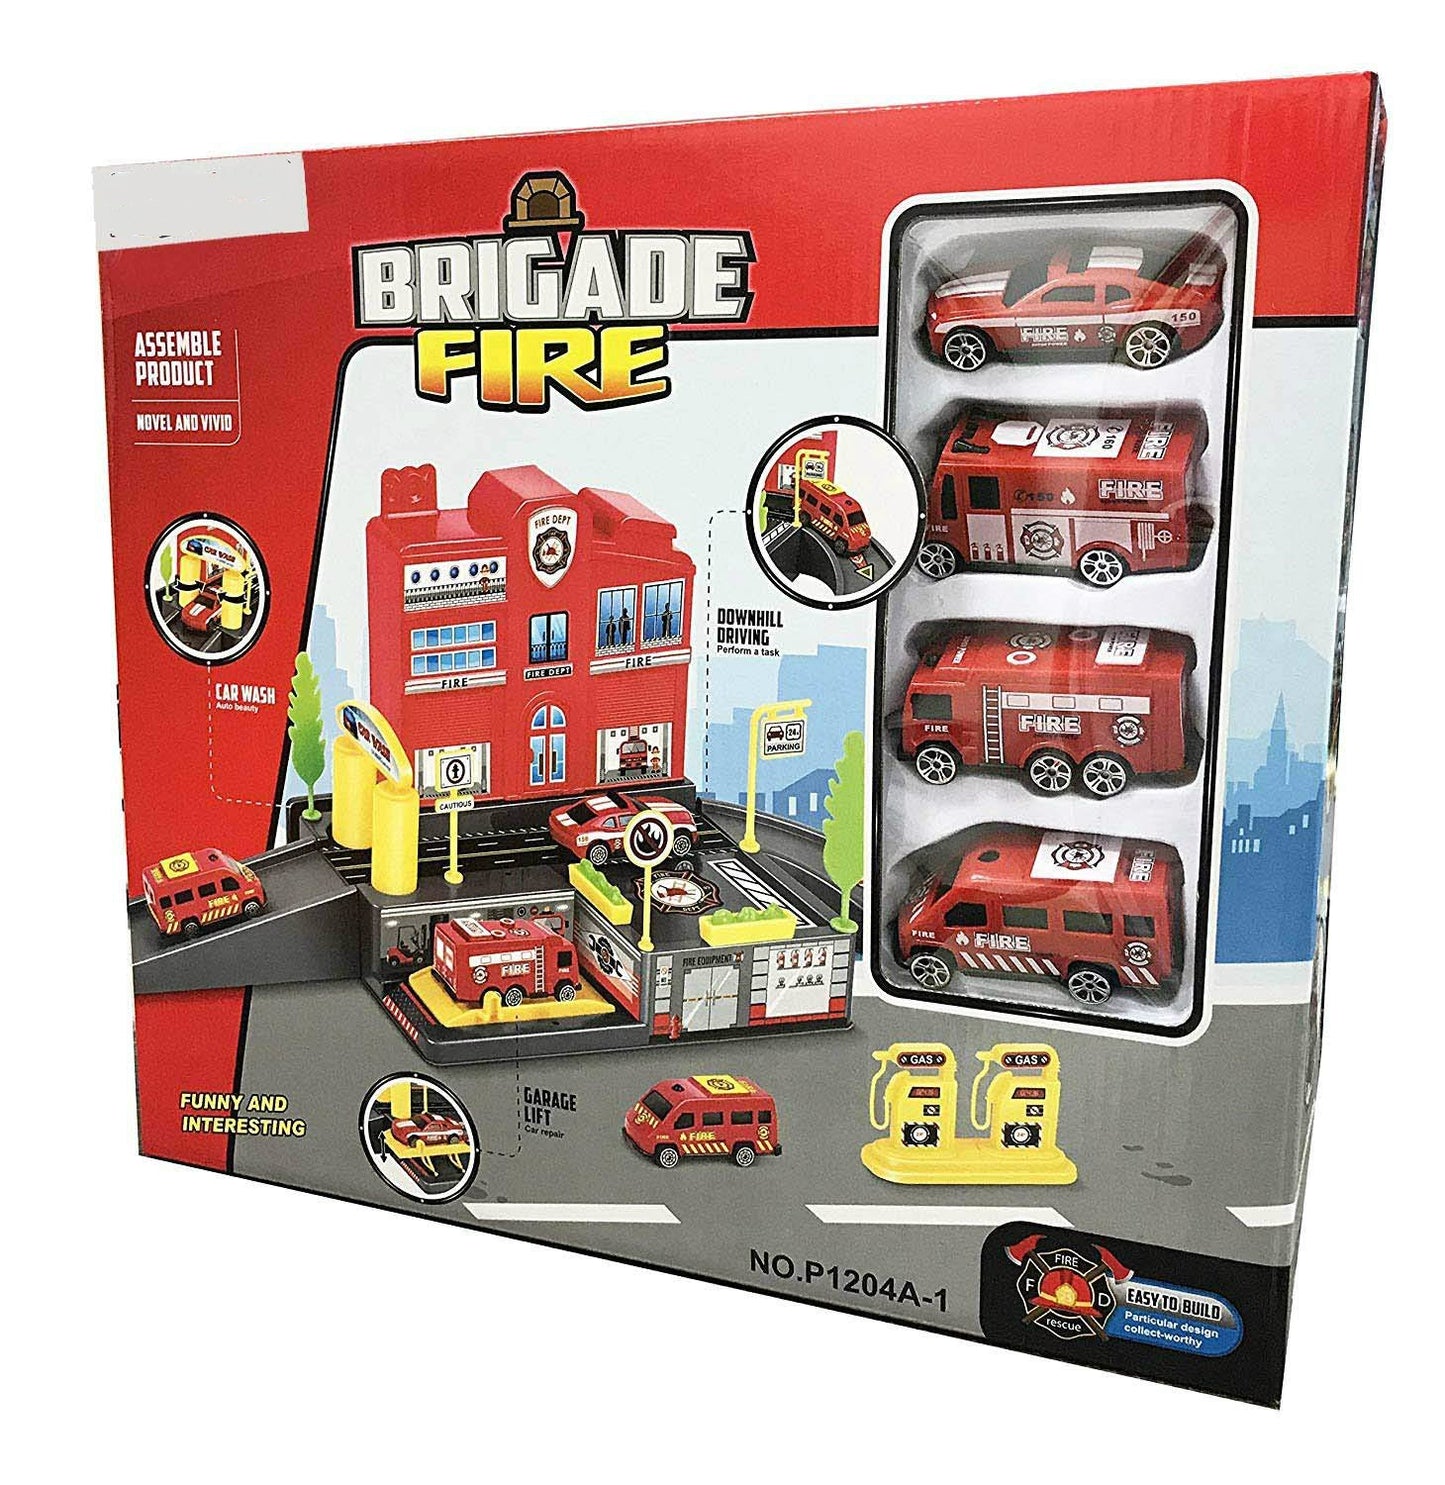 Fire Station Parking Garage Toy Playset with 4 Rescue Vehicles, Car Wash, Lift, Gas Station & Accessories